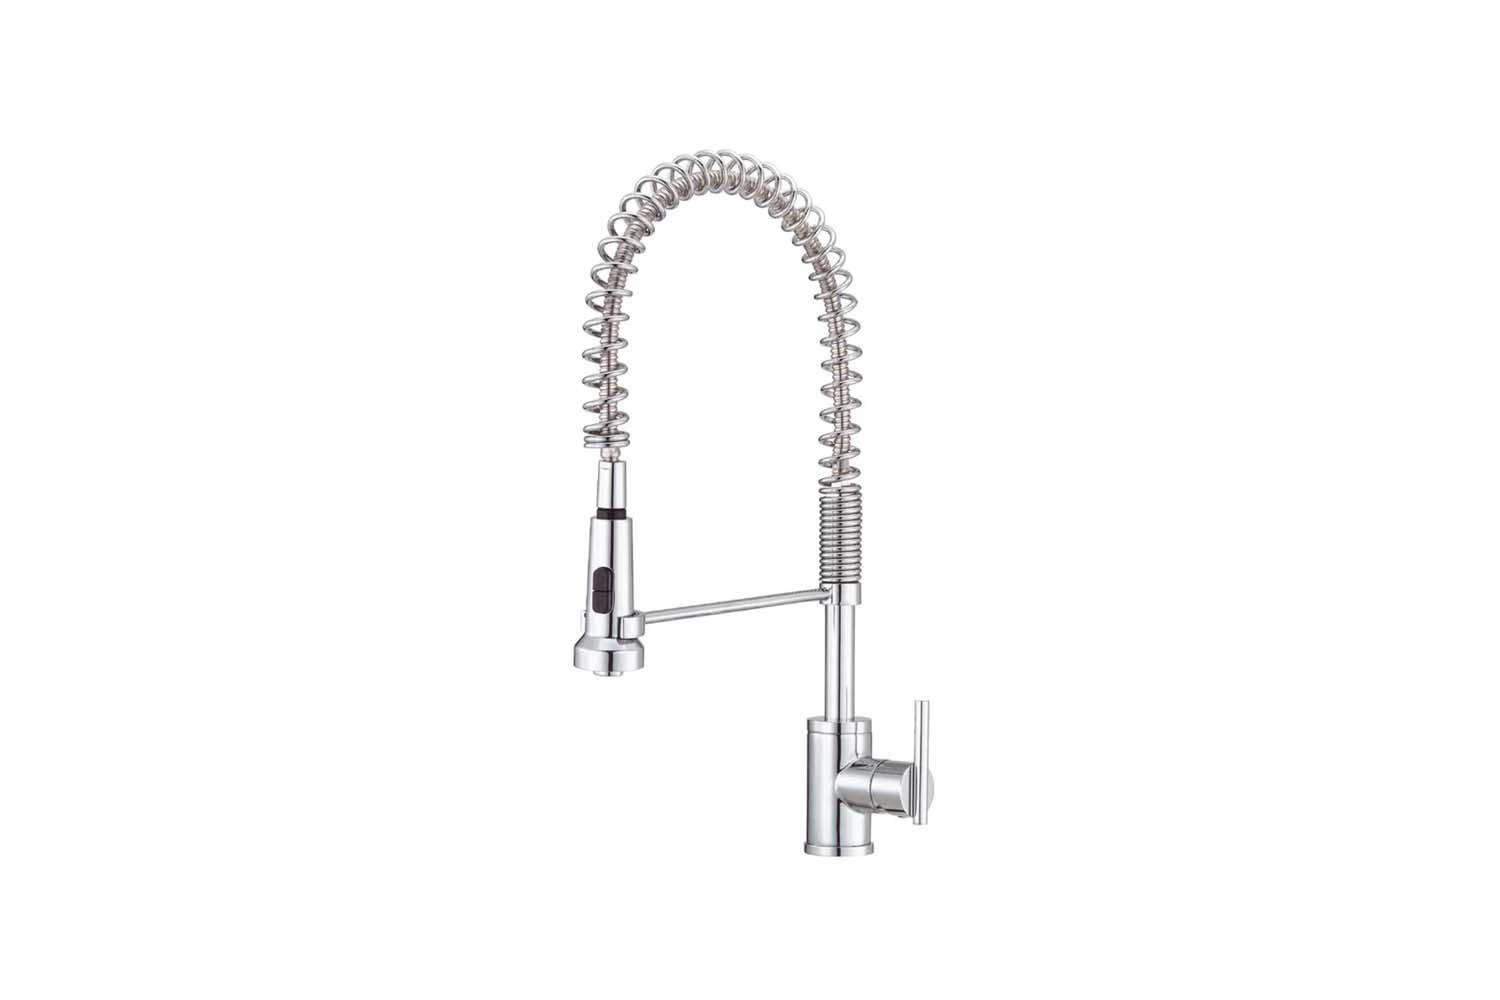 an affordable and practical commercial style faucet, the danze parma singl 18